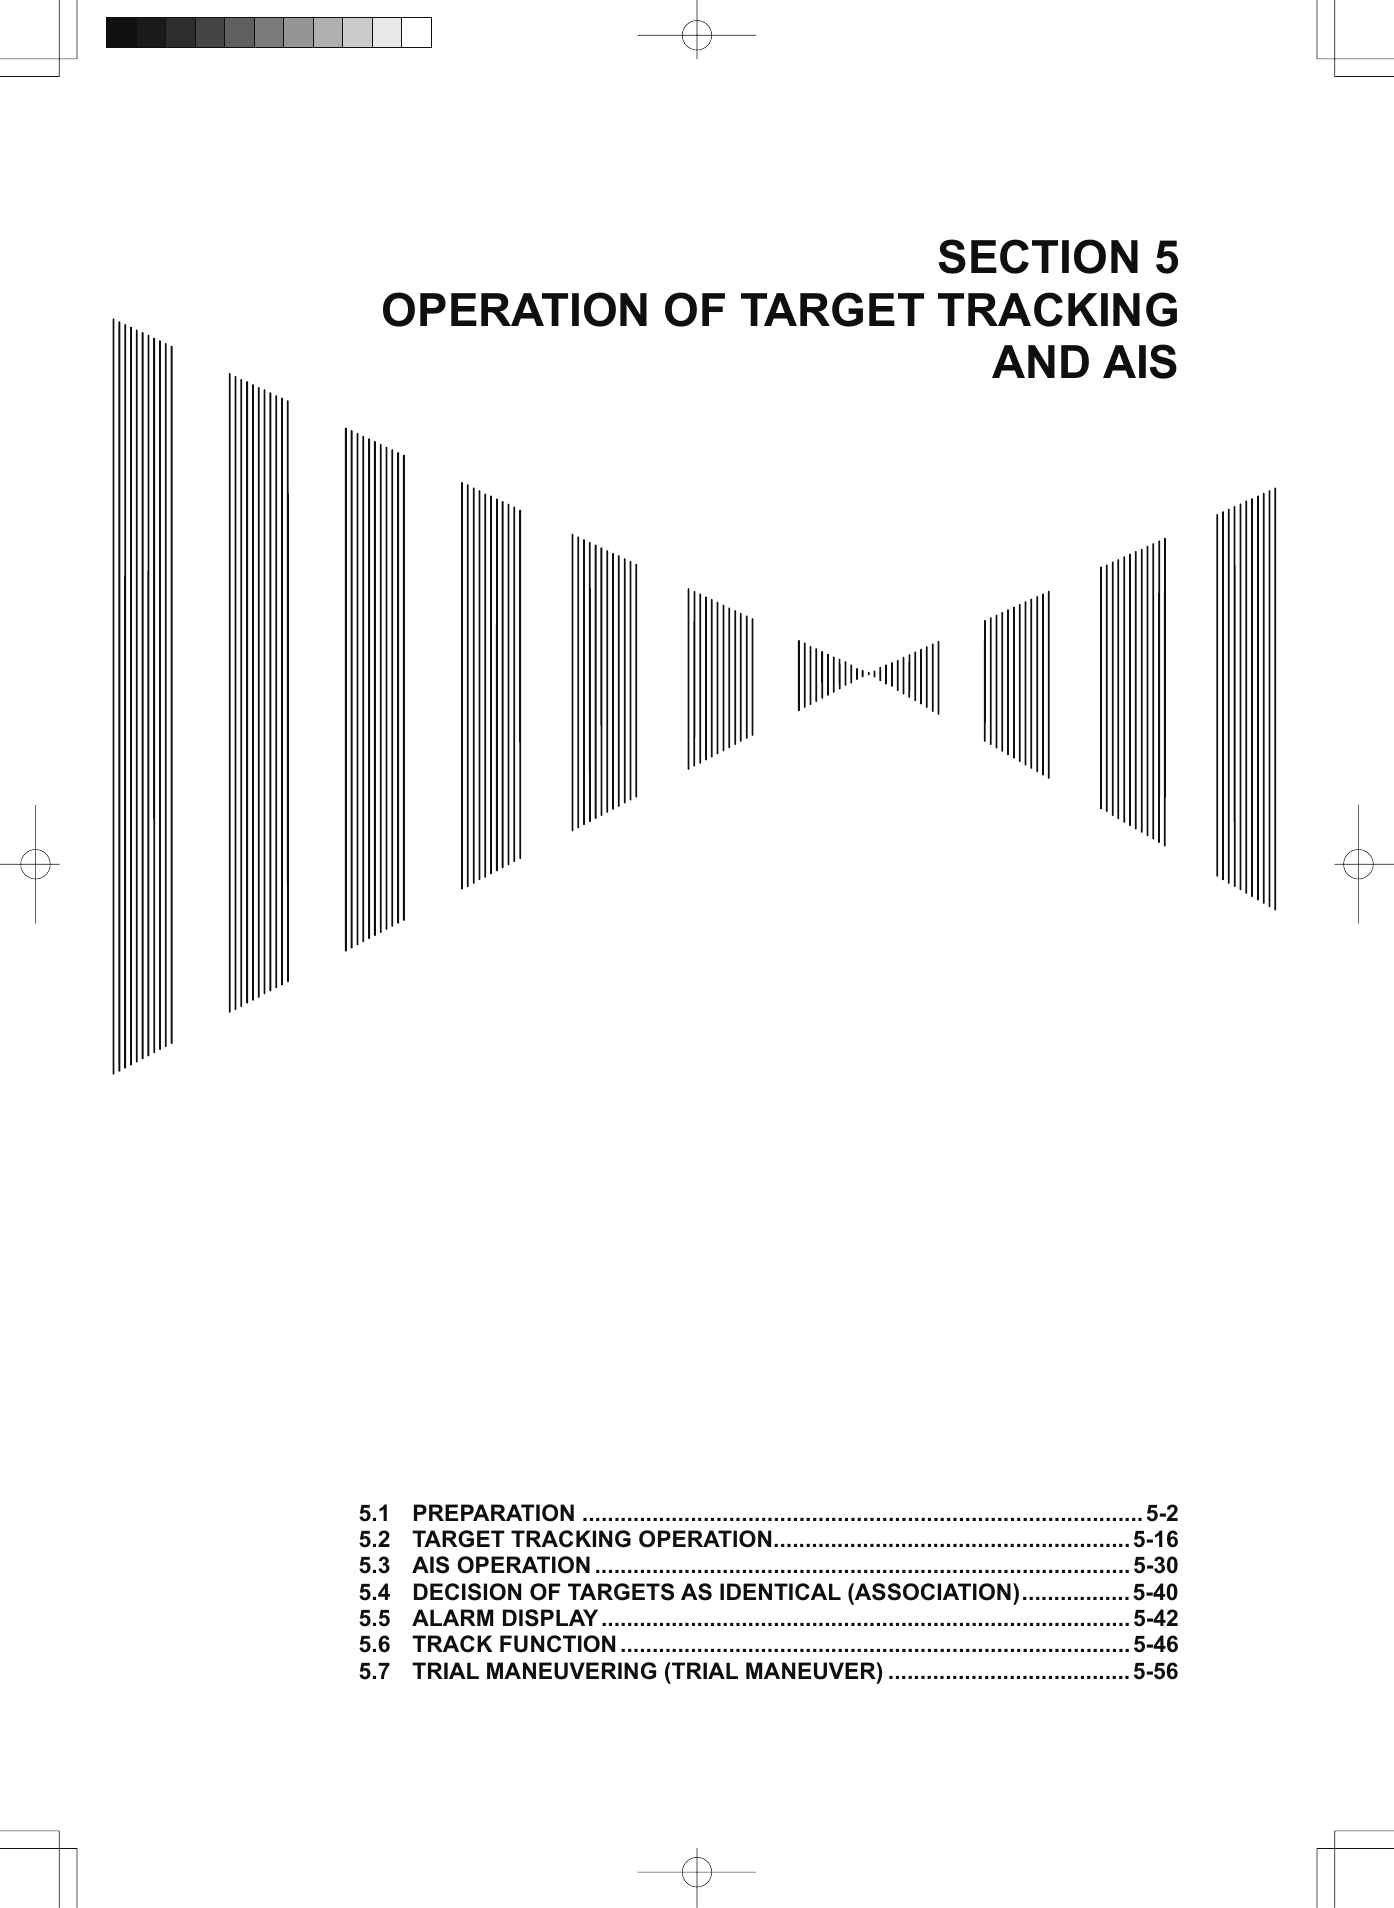  SECTION 5 OPERATION OF TARGET TRACKING AND AIS                                           5.1 PREPARATION ........................................................................................ 5-2 5.2 TARGET TRACKING OPERATION........................................................5-16 5.3 AIS OPERATION ....................................................................................5-30 5.4 DECISION OF TARGETS AS IDENTICAL (ASSOCIATION).................5-40 5.5 ALARM DISPLAY...................................................................................5-42 5.6 TRACK FUNCTION ................................................................................5-46 5.7 TRIAL MANEUVERING (TRIAL MANEUVER) ......................................5-56 